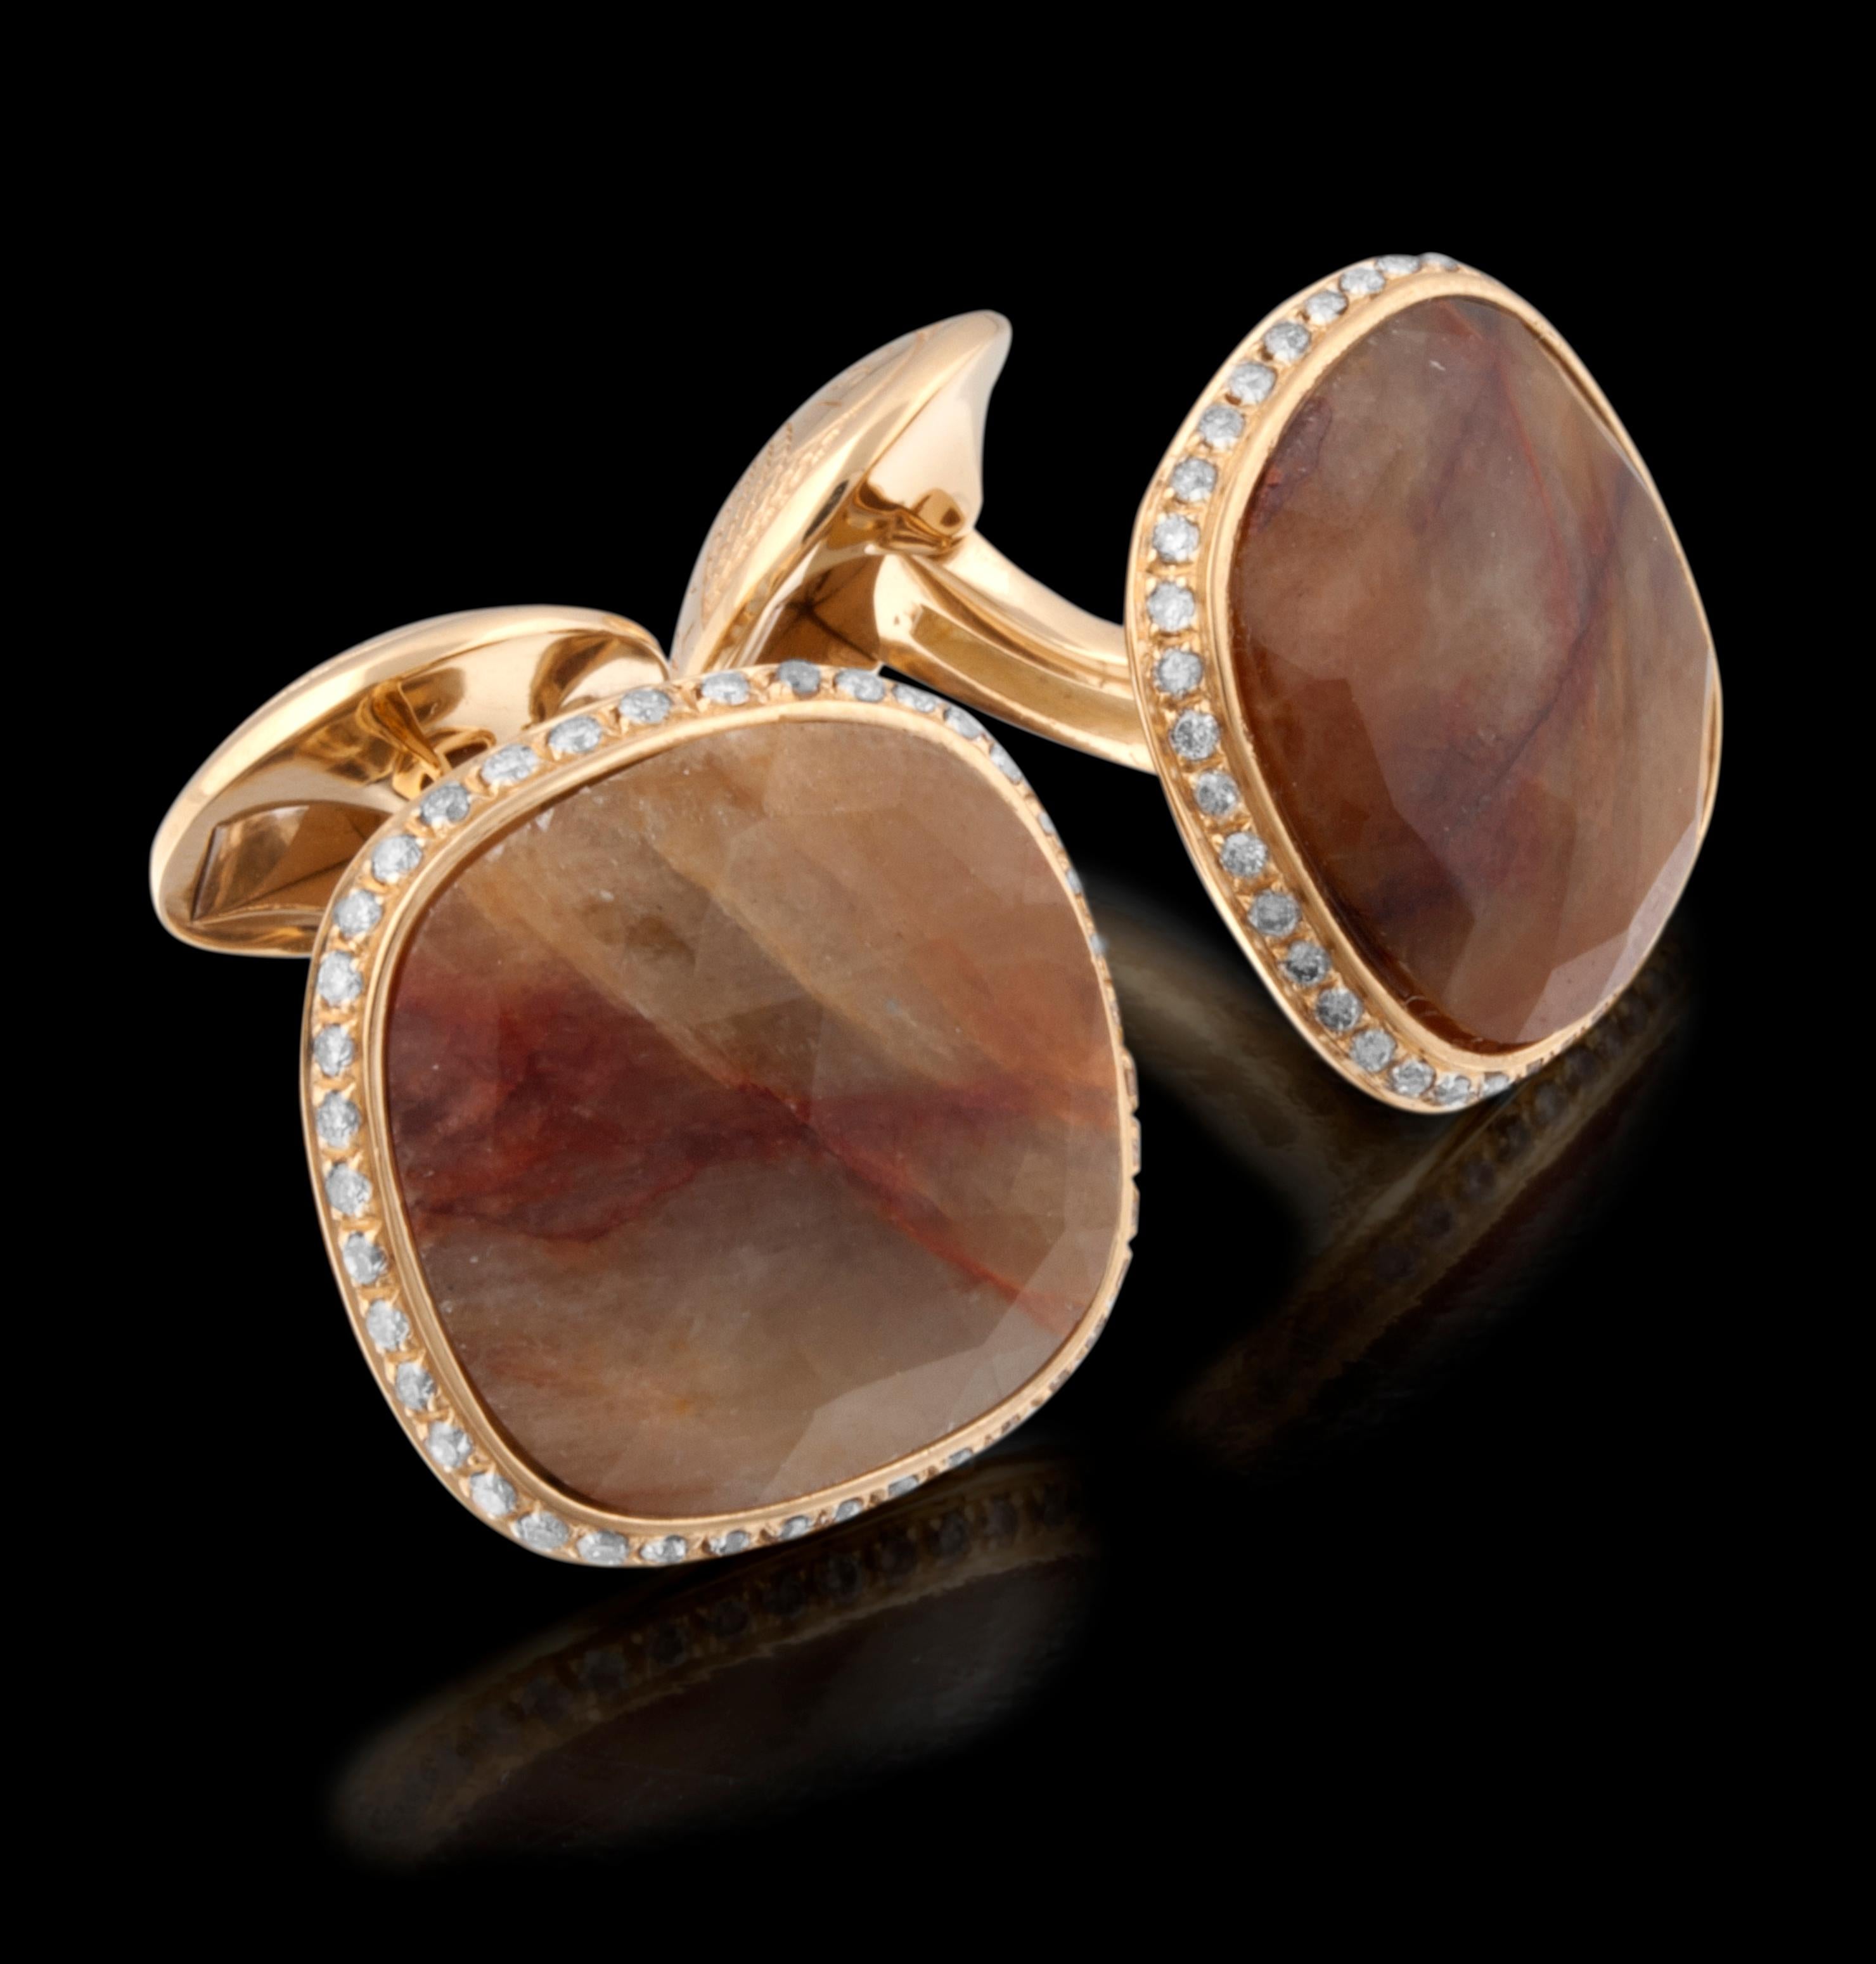 Faceted Cabochons of semi-precious and precious stones have been immaculately set within a perfect bezel setting, decorated with exquisite diamonds, scattered framing the stone. A classic collection of cufflinks that will remain timeless, to pass